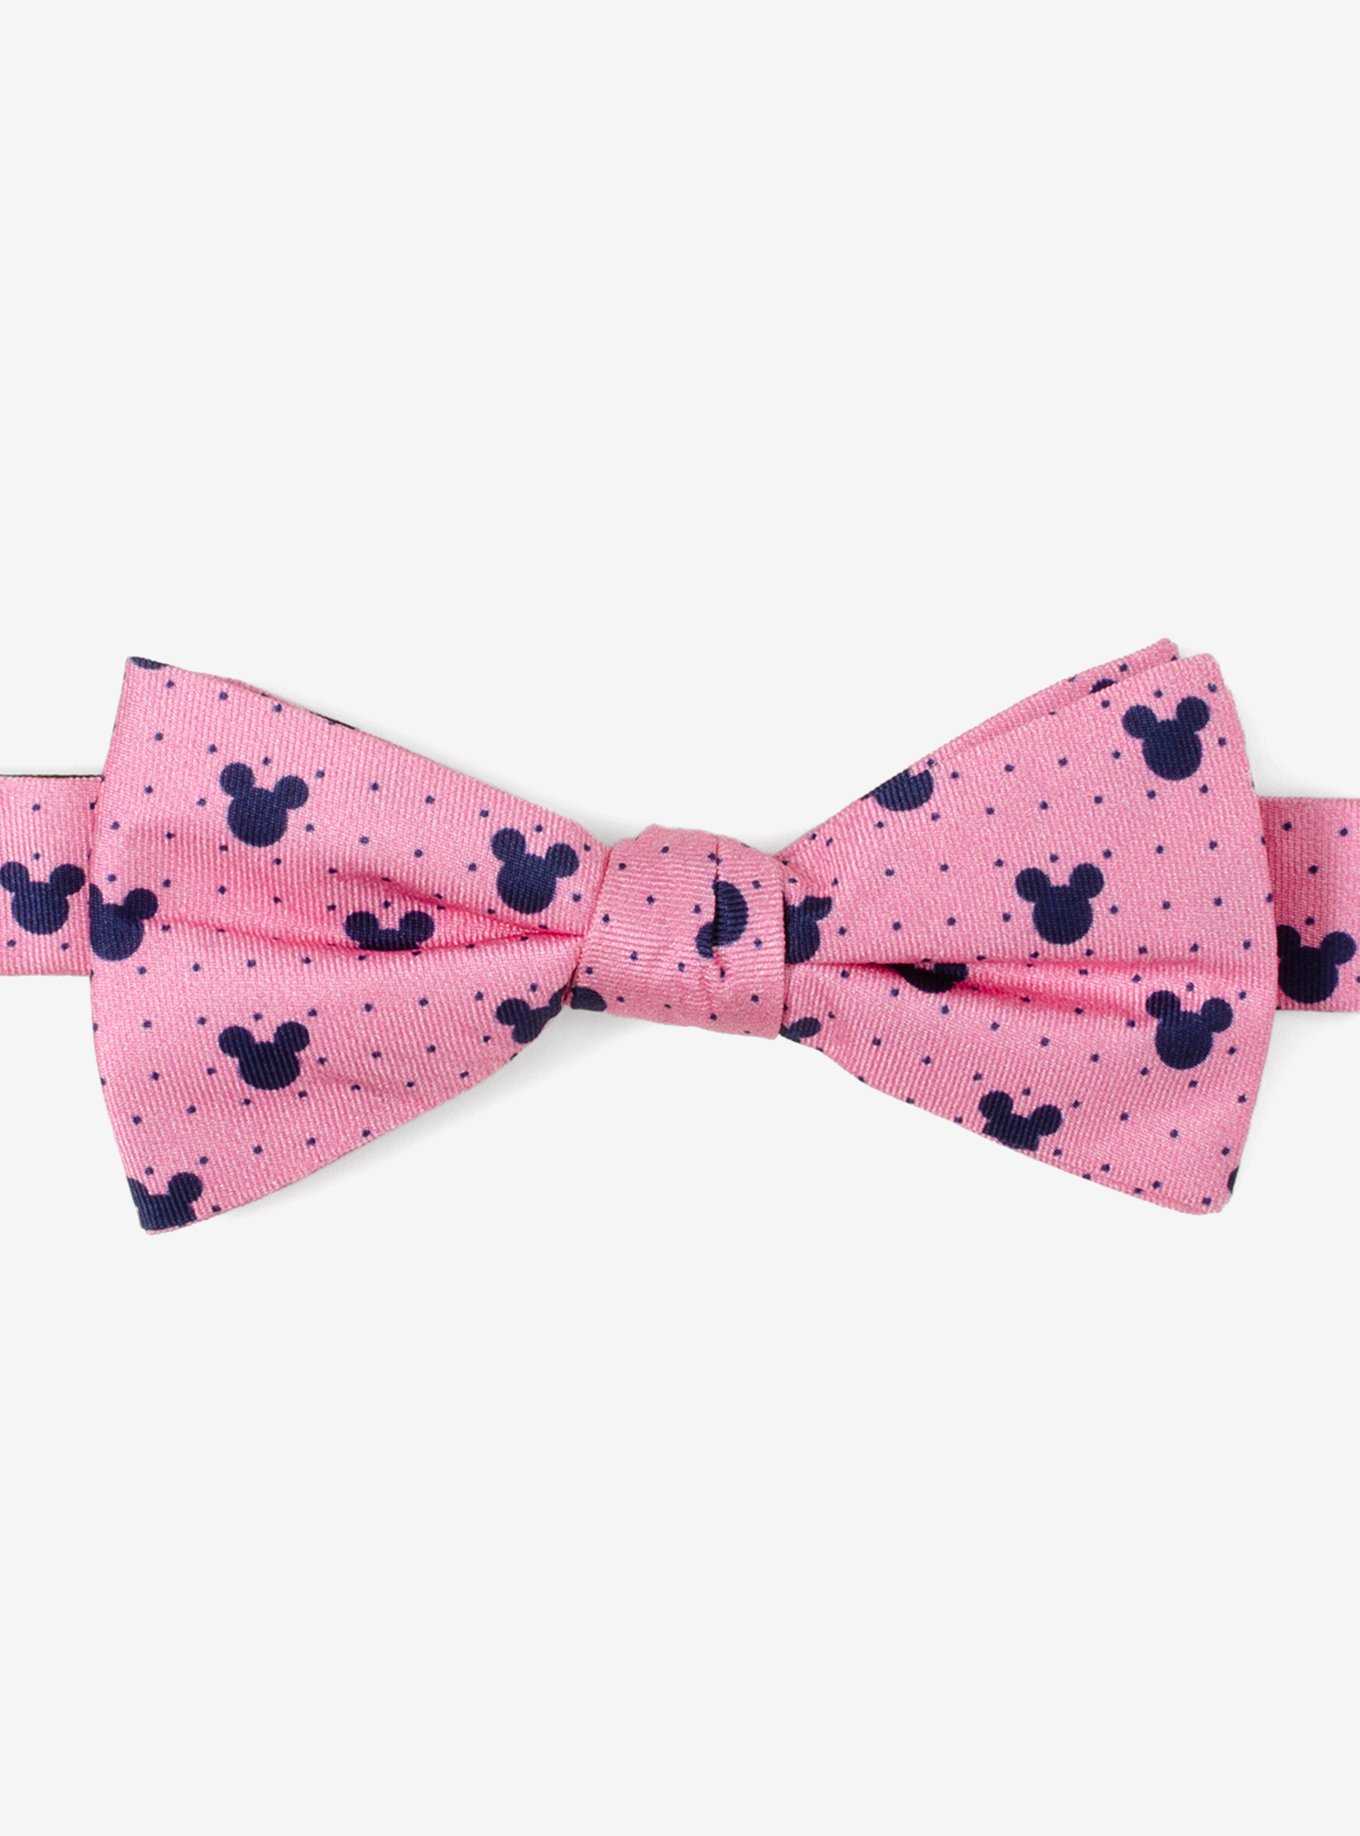 Disney Mickey Mouse Silhouette Pink Dot Pre-tied Bow Tie, , hi-res